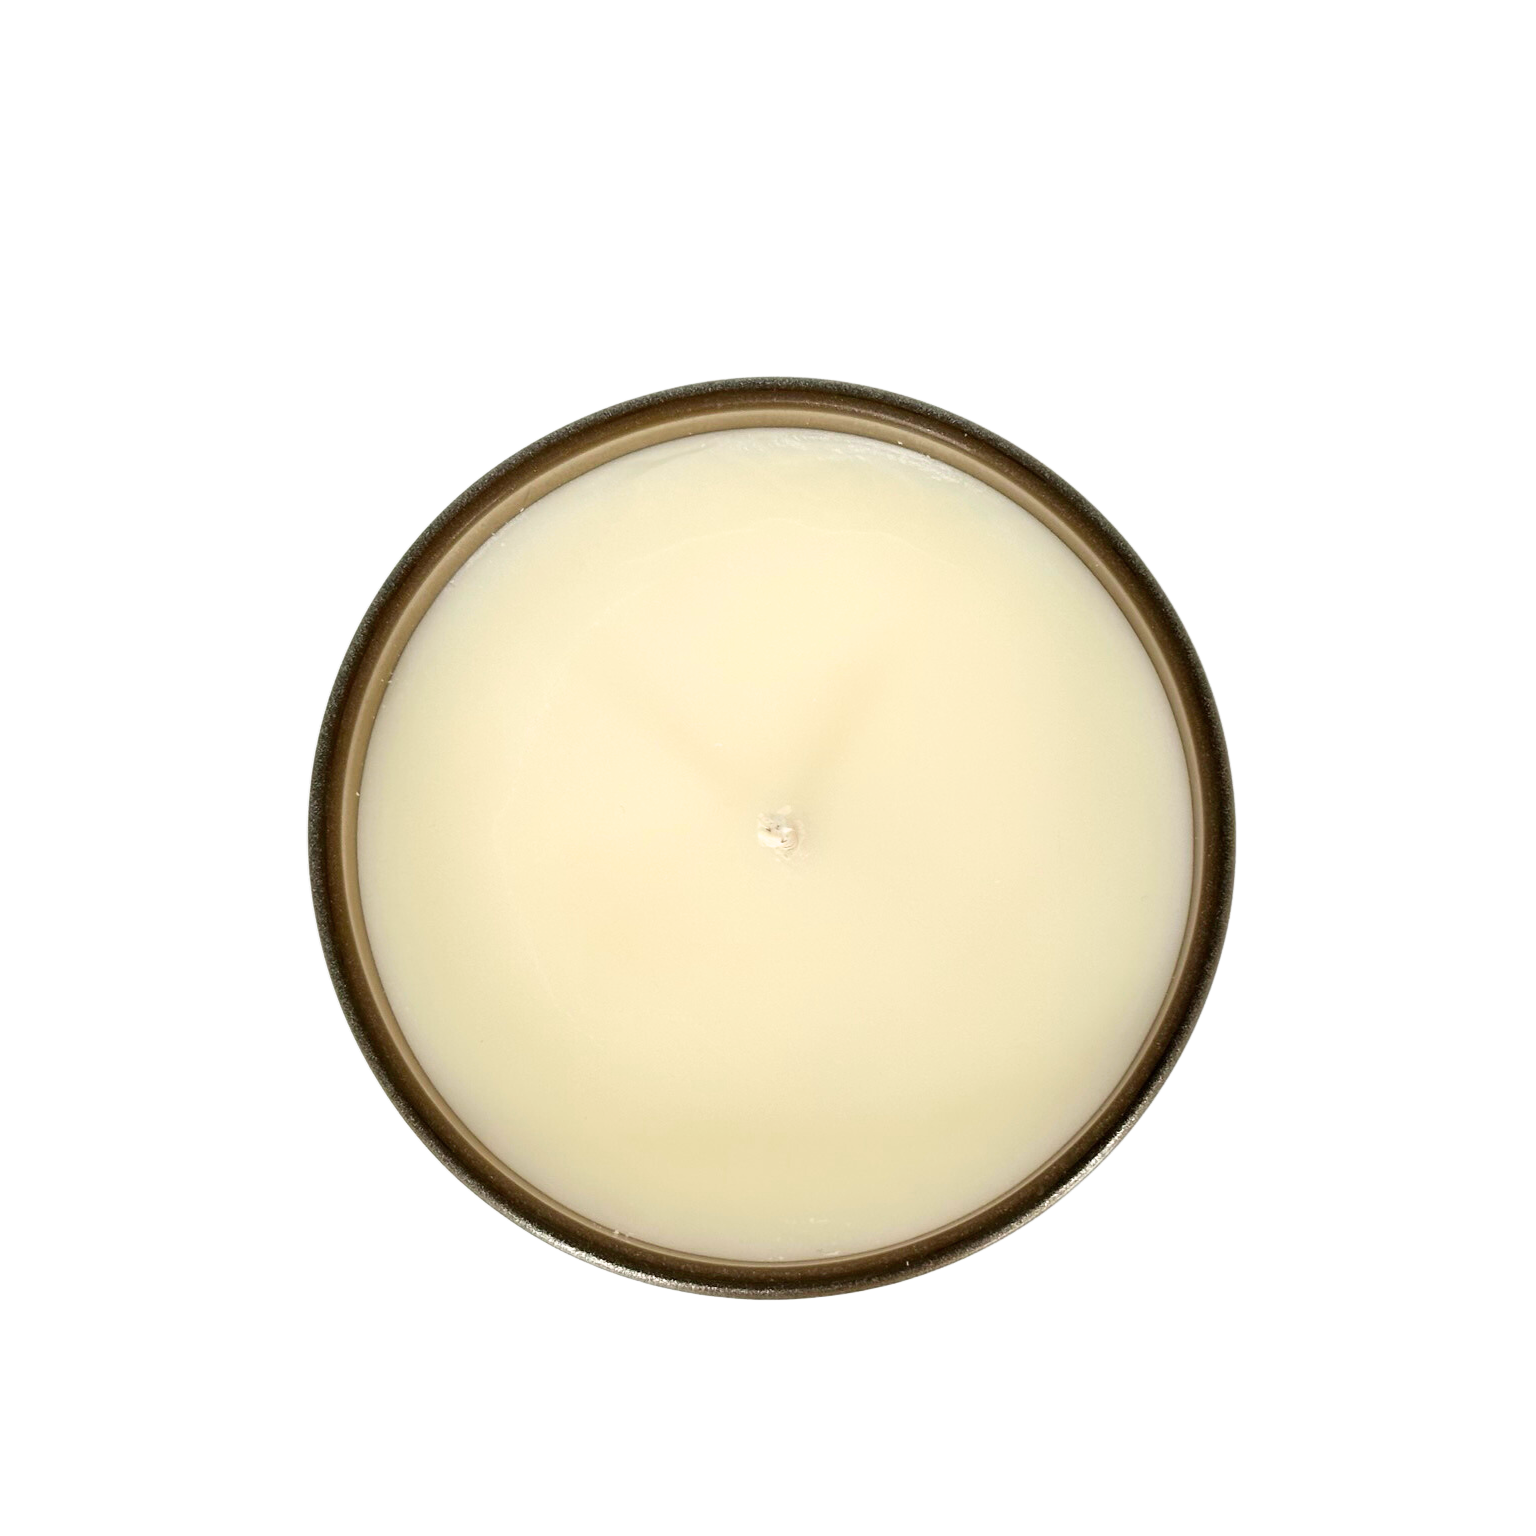 A top-down view of a soy candle is shown. The wax is a natural beige color, with a white cotton wick in the middle.